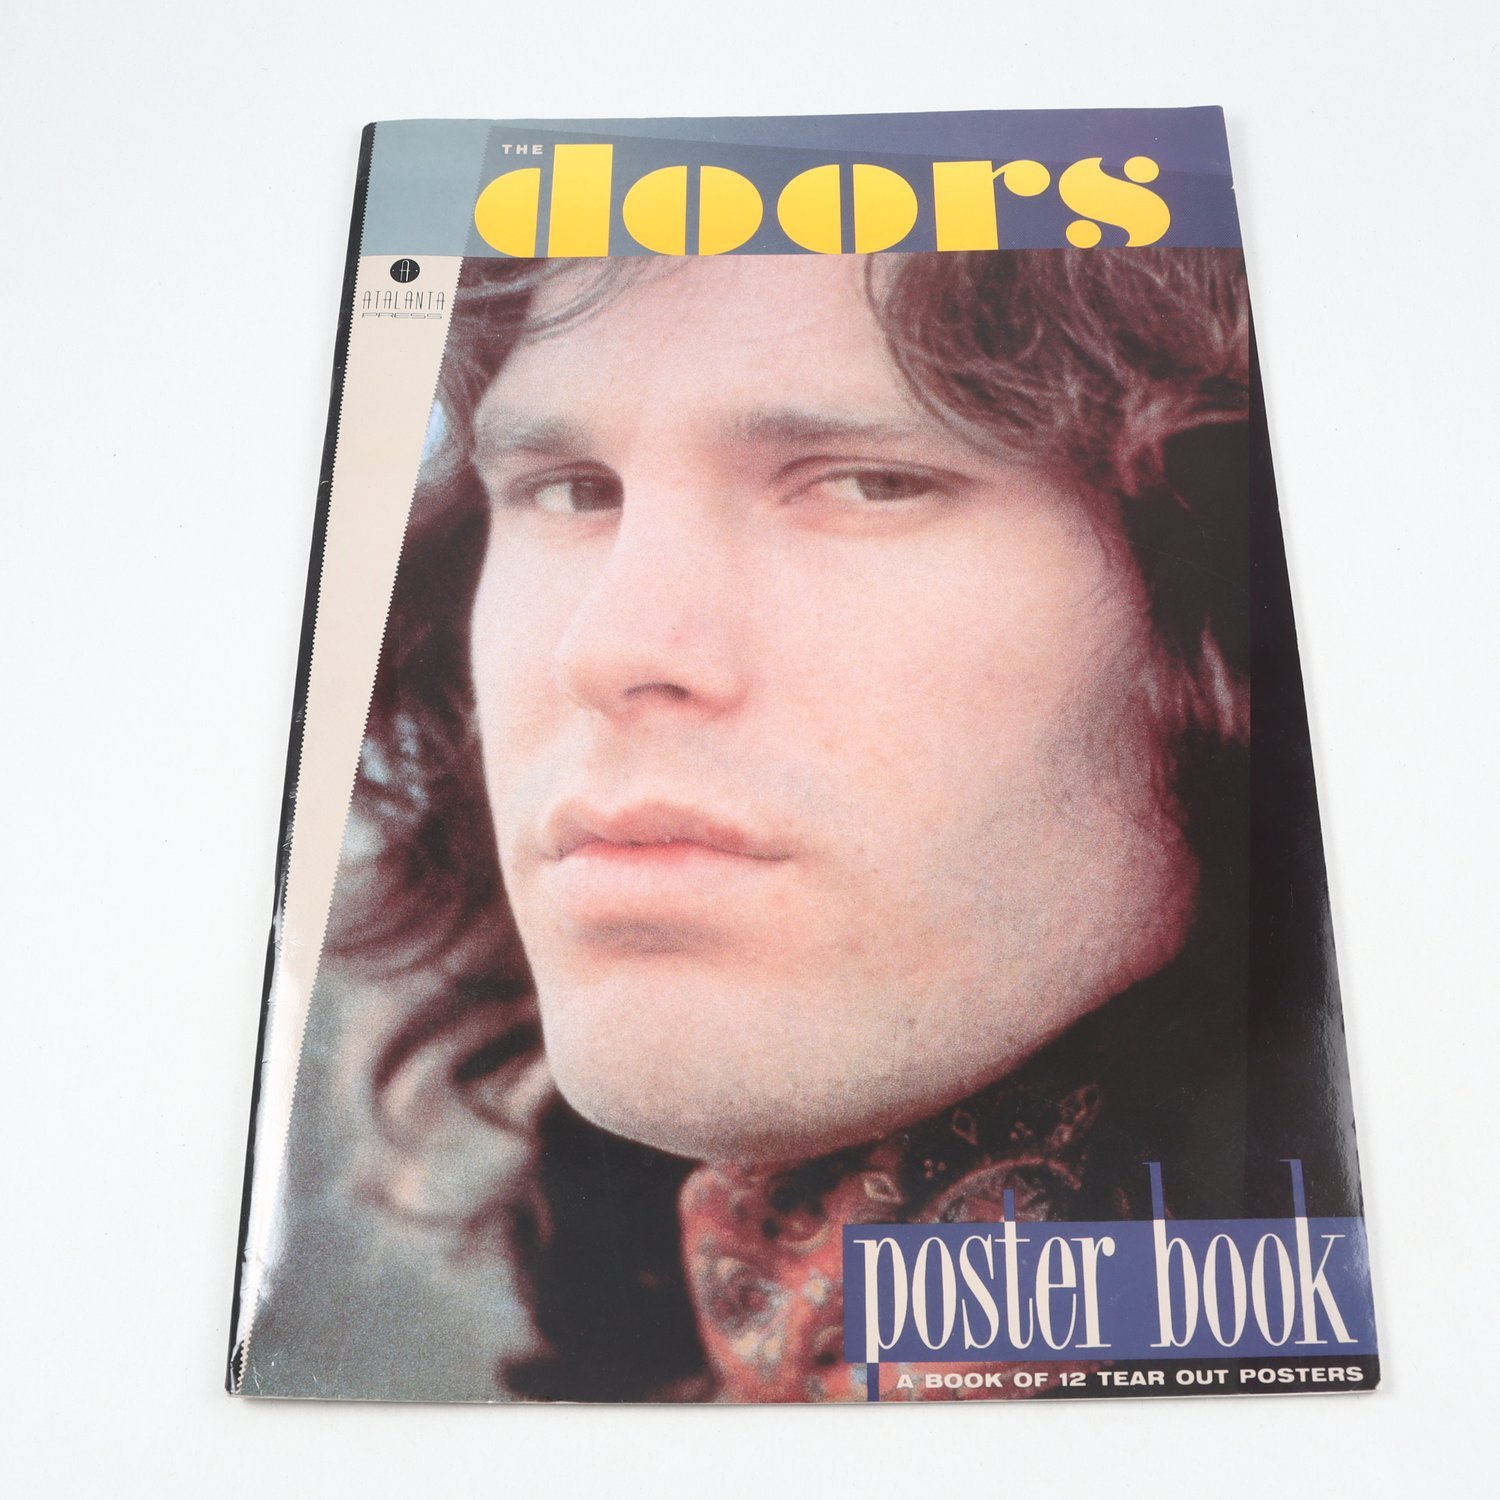 The Doors poster book, A book of 12 tear out posters.